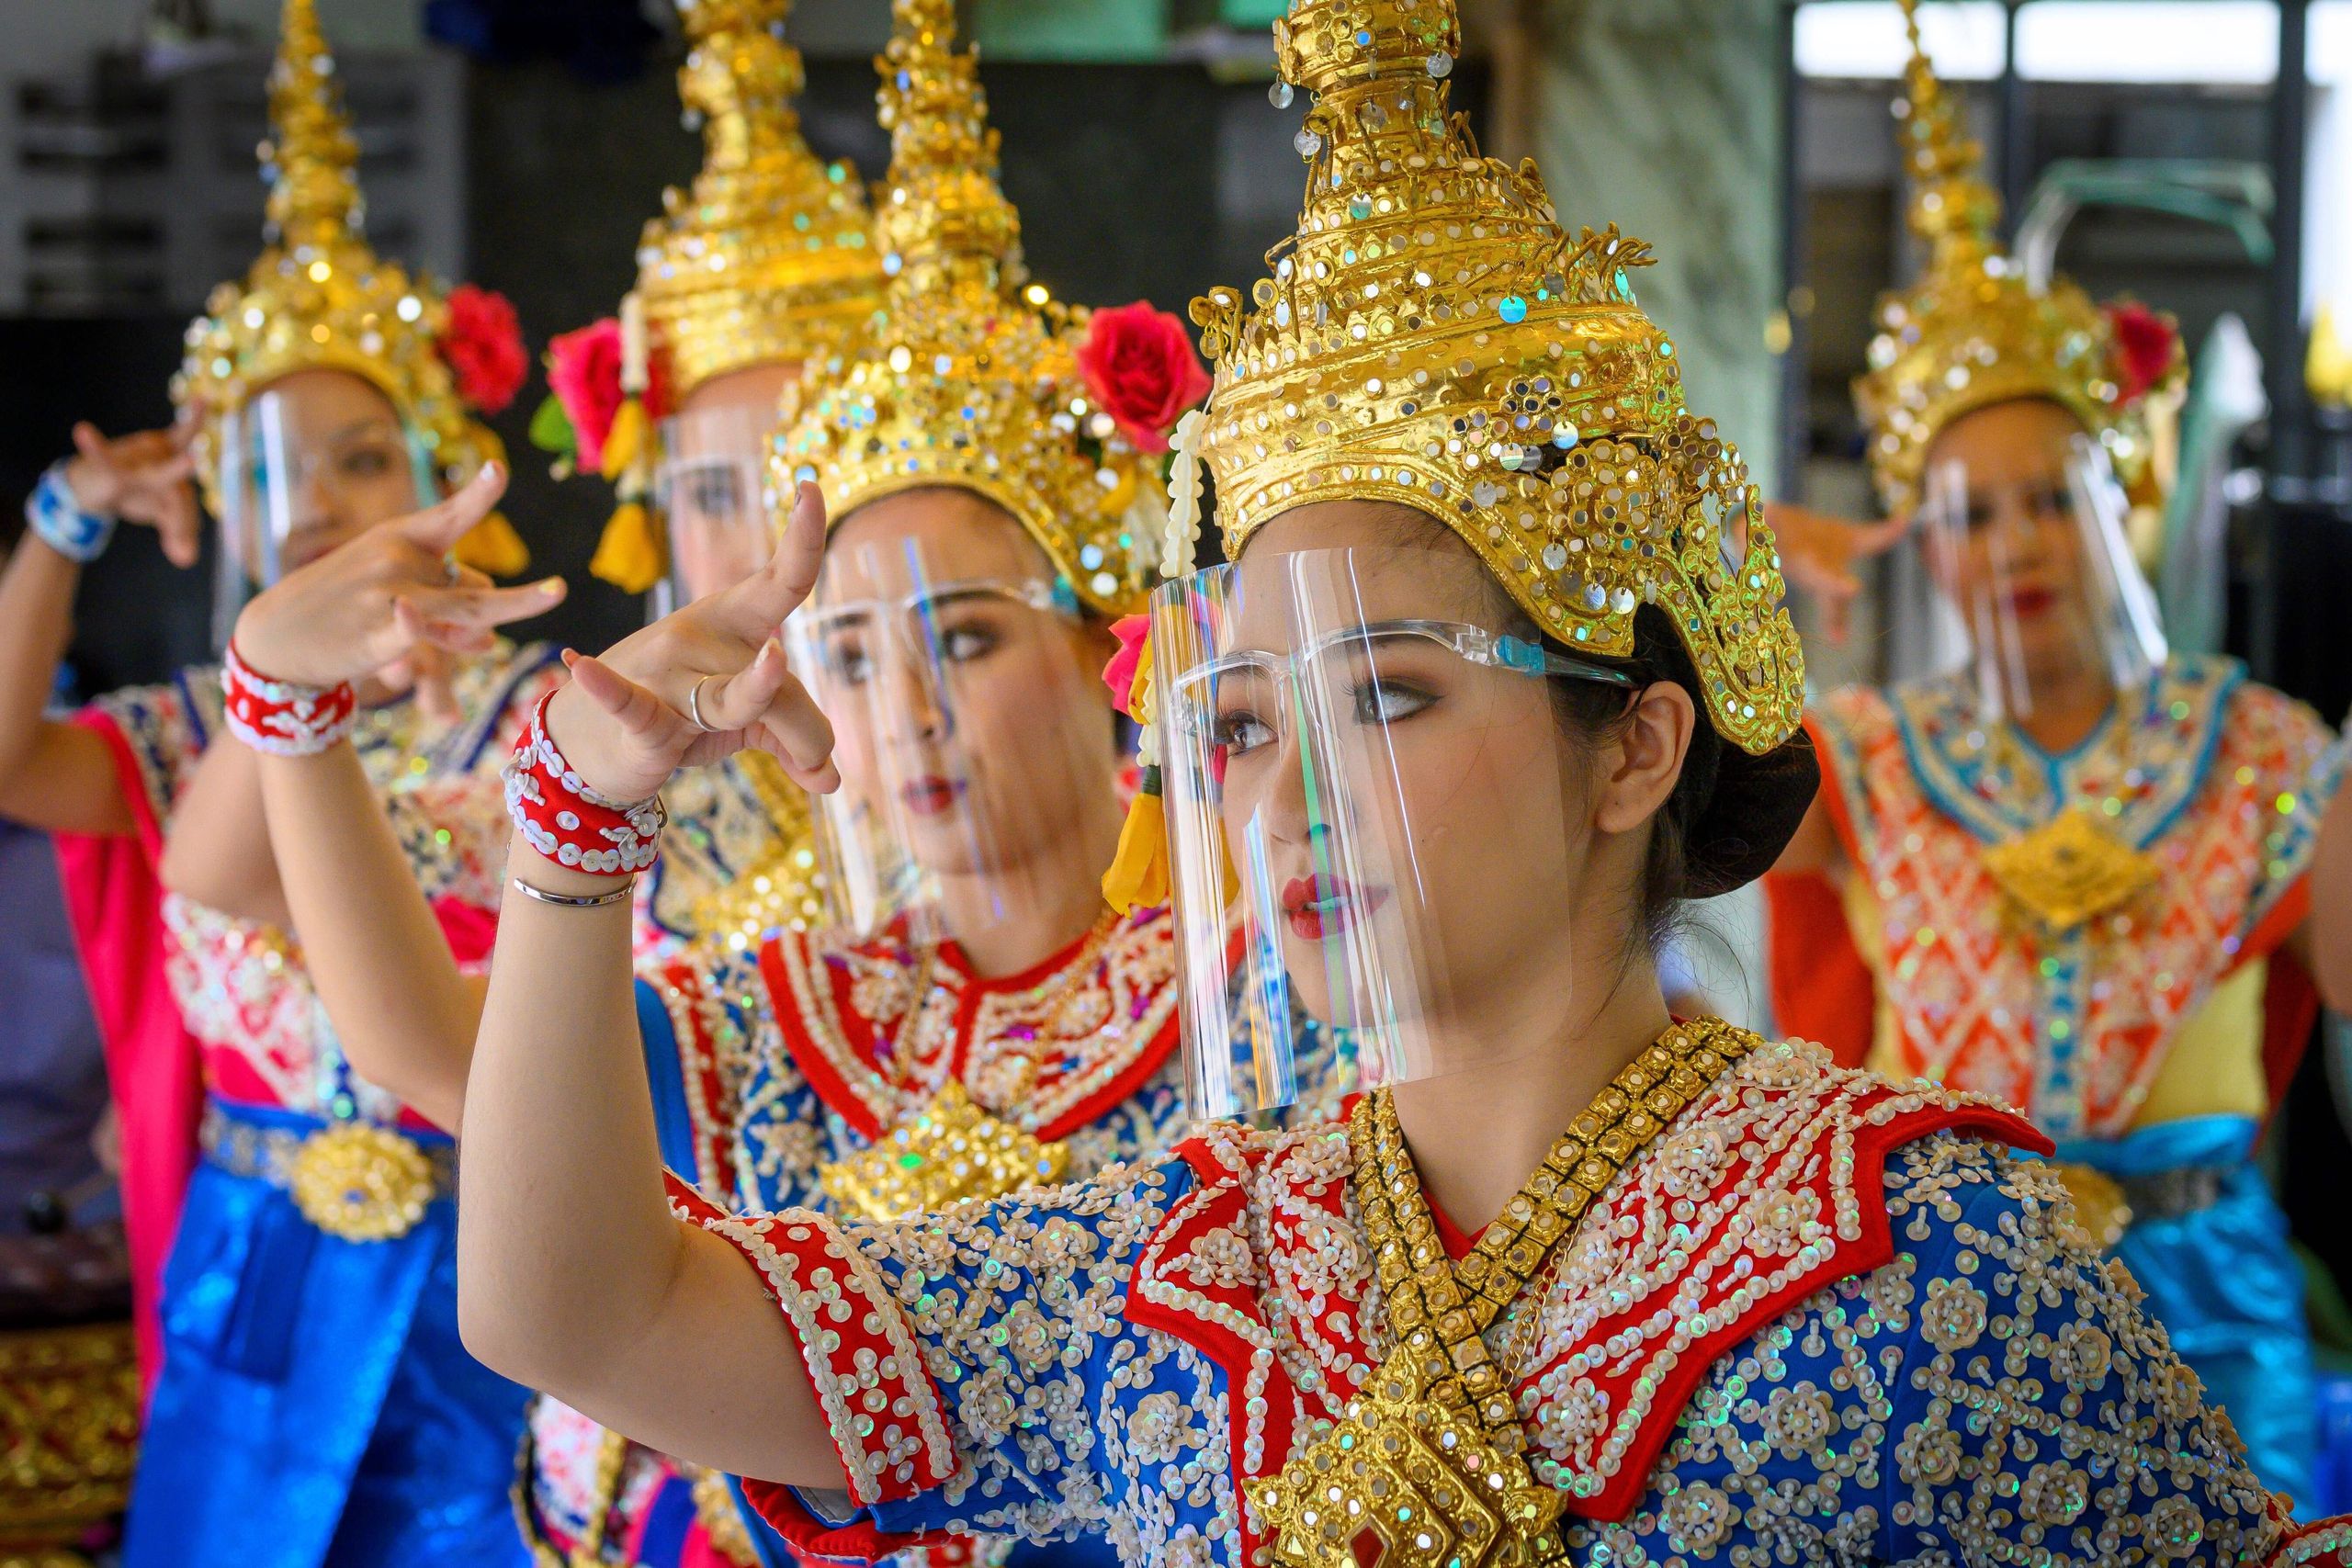 Traditional Thai dancers wearing protective face shields perform at the Erawan Shrine, which was reopened after the Thai government relaxed measures to combat the spread of the novel coronavirus in Bangkok on Monday.